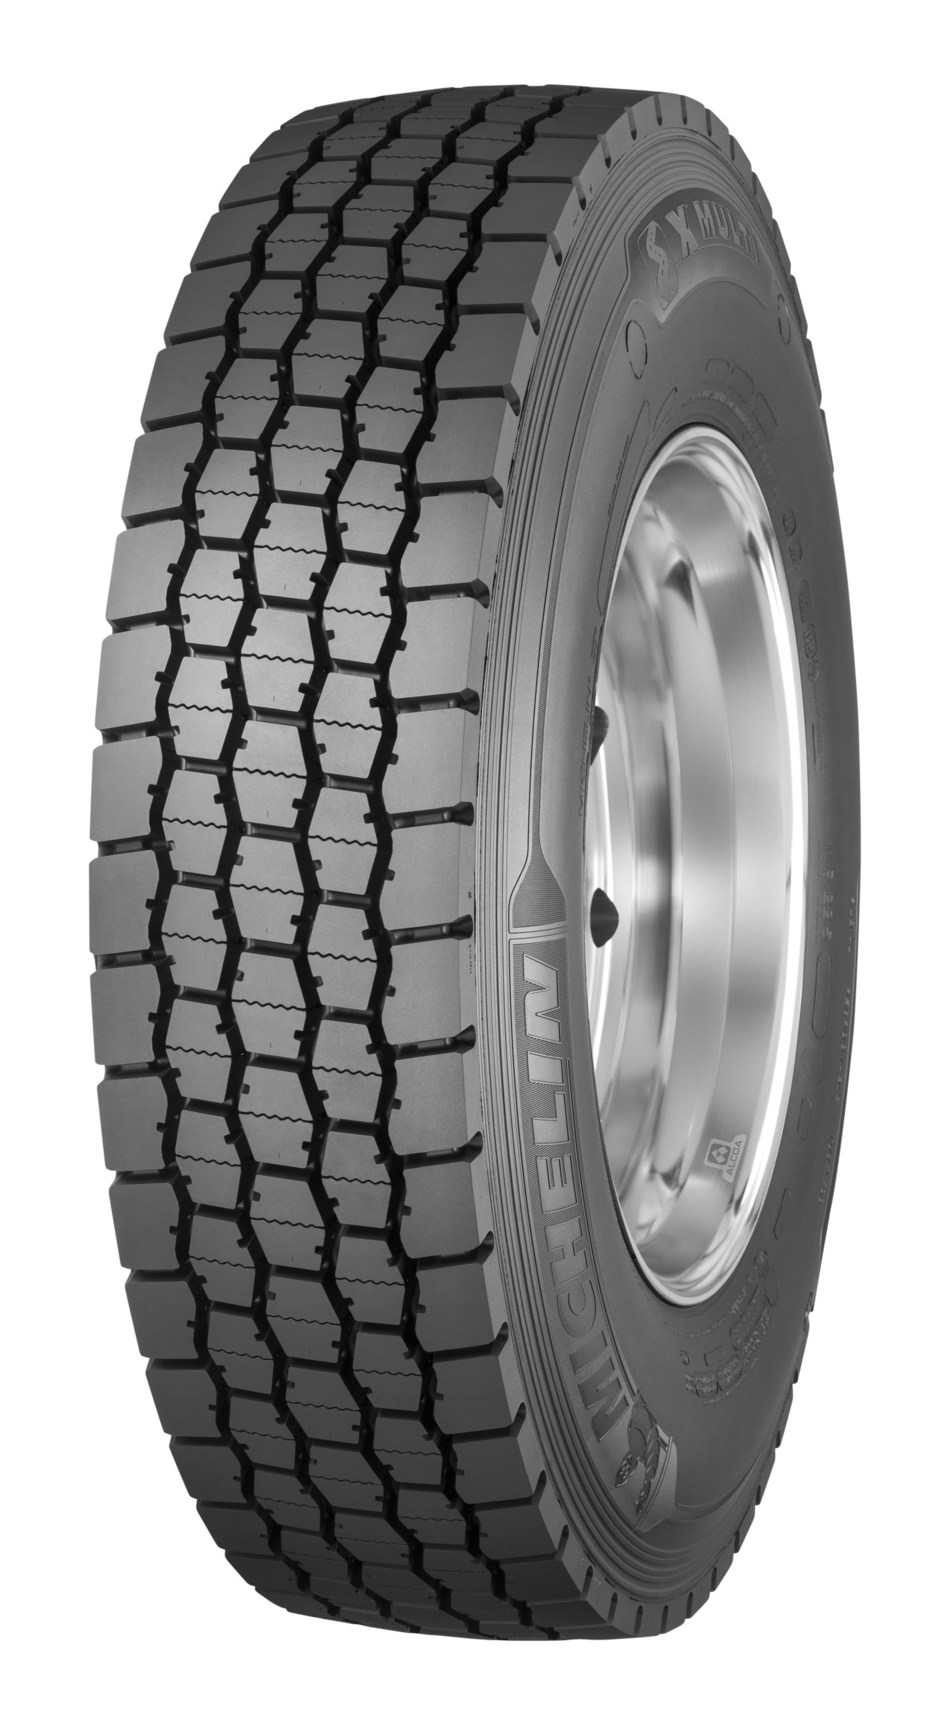 New MICHELIN CompromiseFree Regional DrivePosition Truck Tire Offers